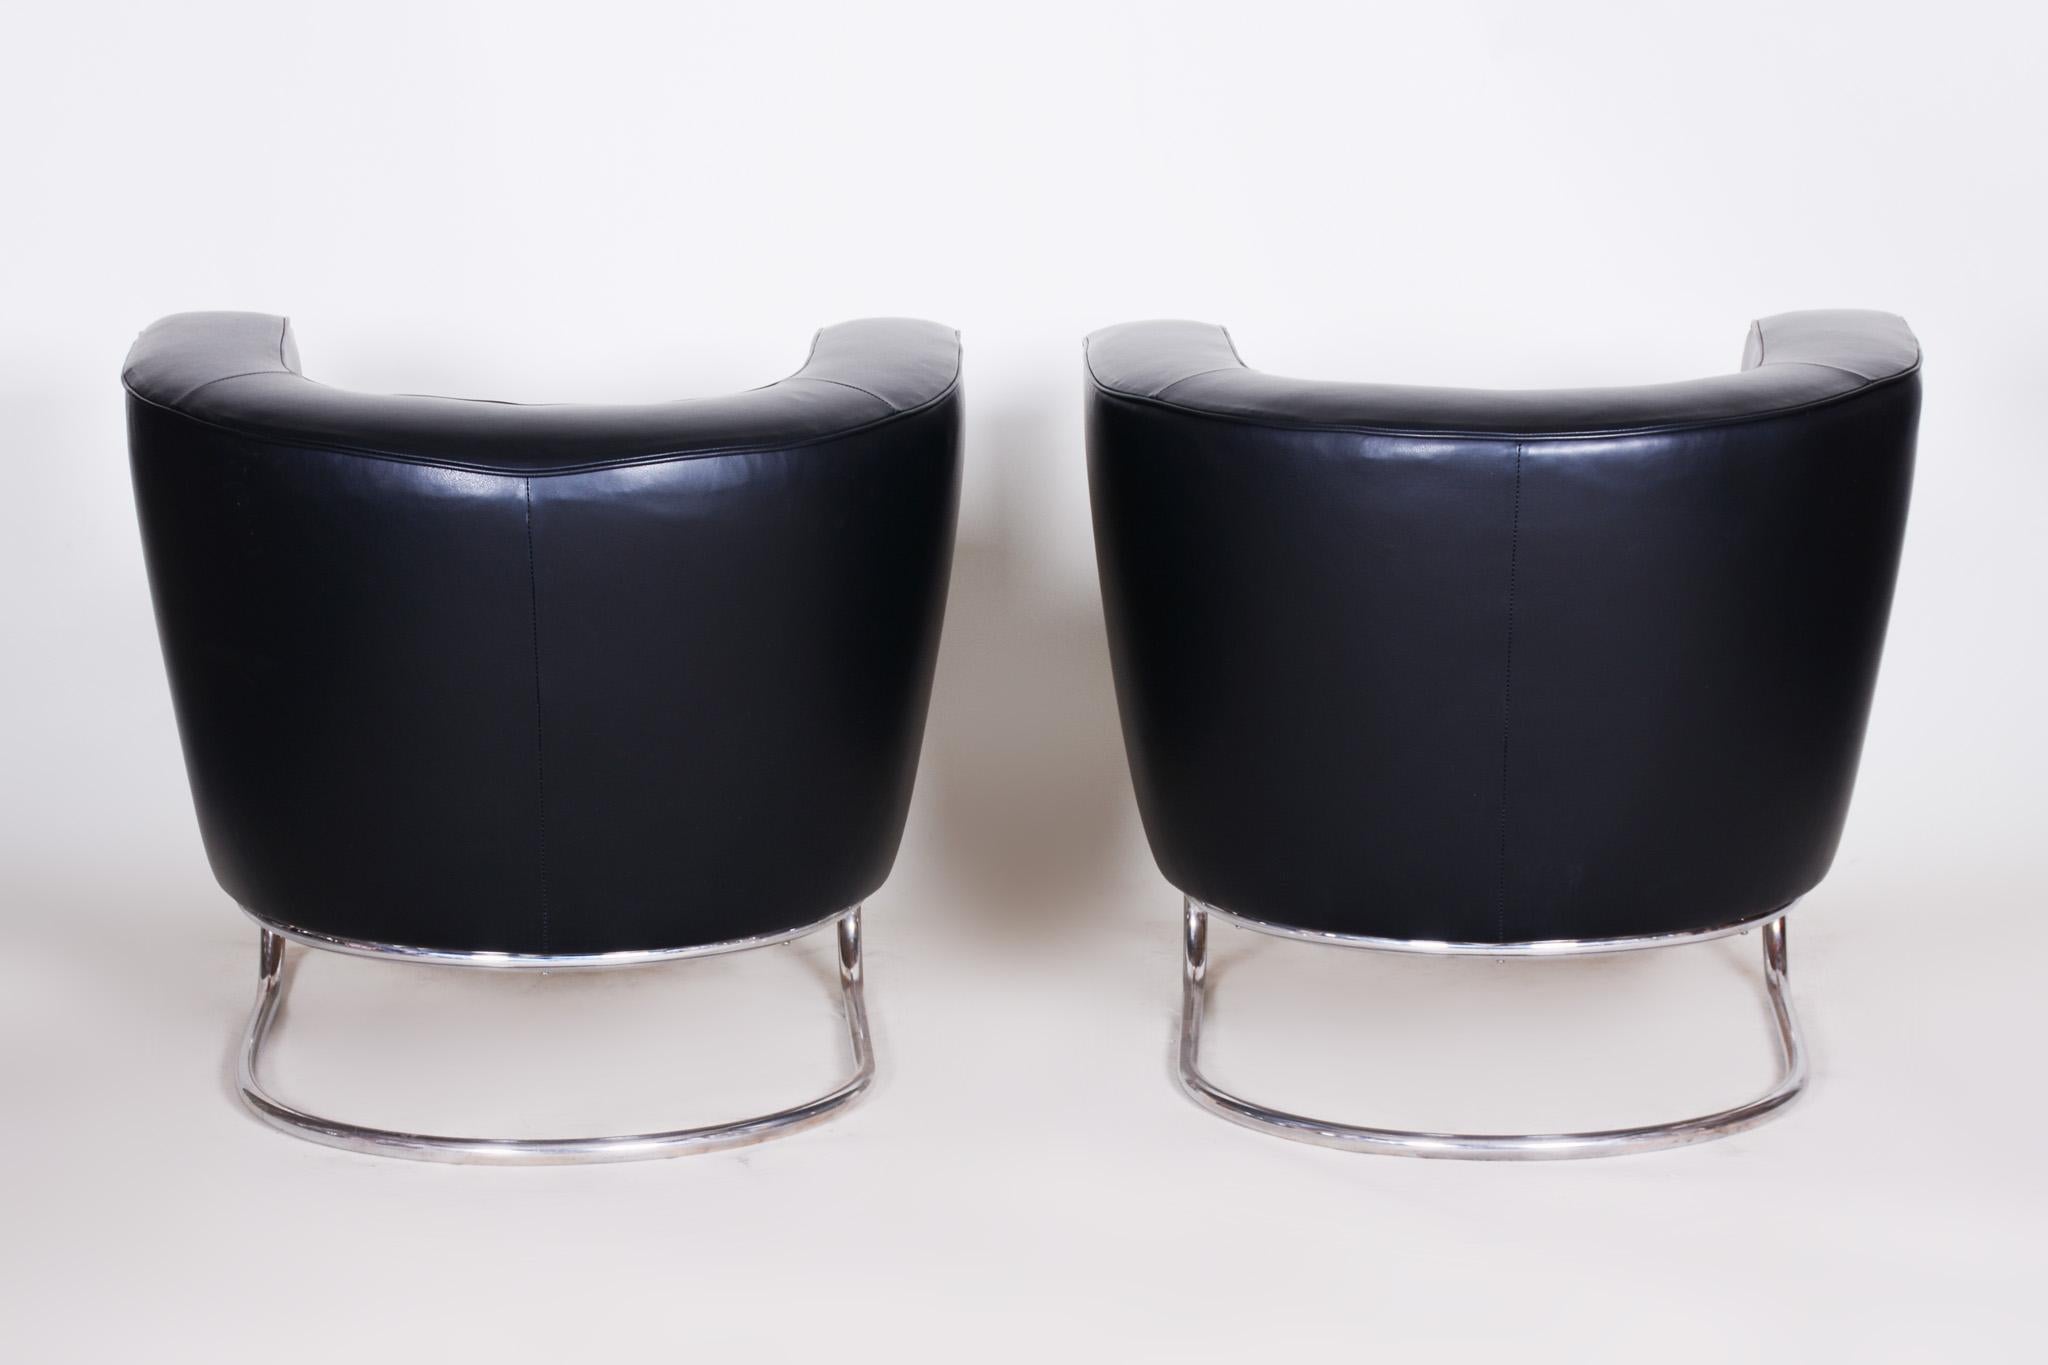 Pair of Black Art Deco Armchairs from Czechoslovakia by Jindrich Halabala, 1930s For Sale 6